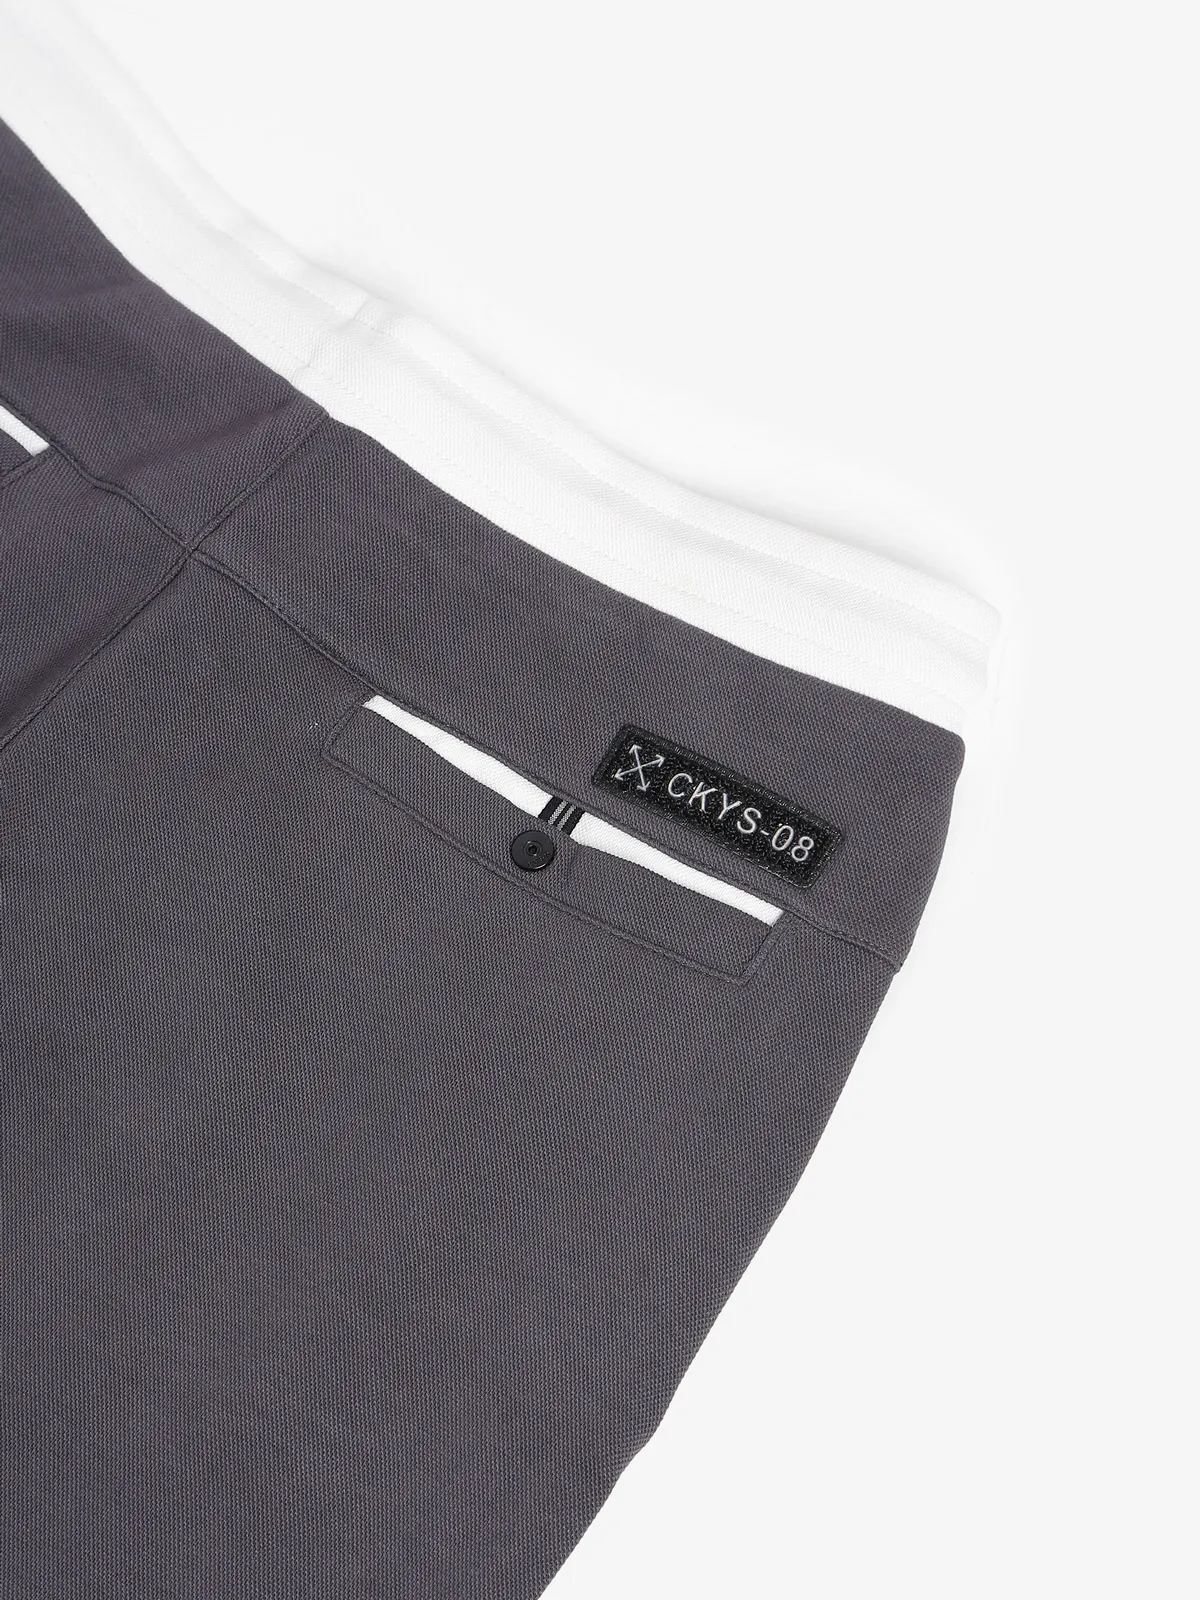 Cookyss grey cotton solid track pant